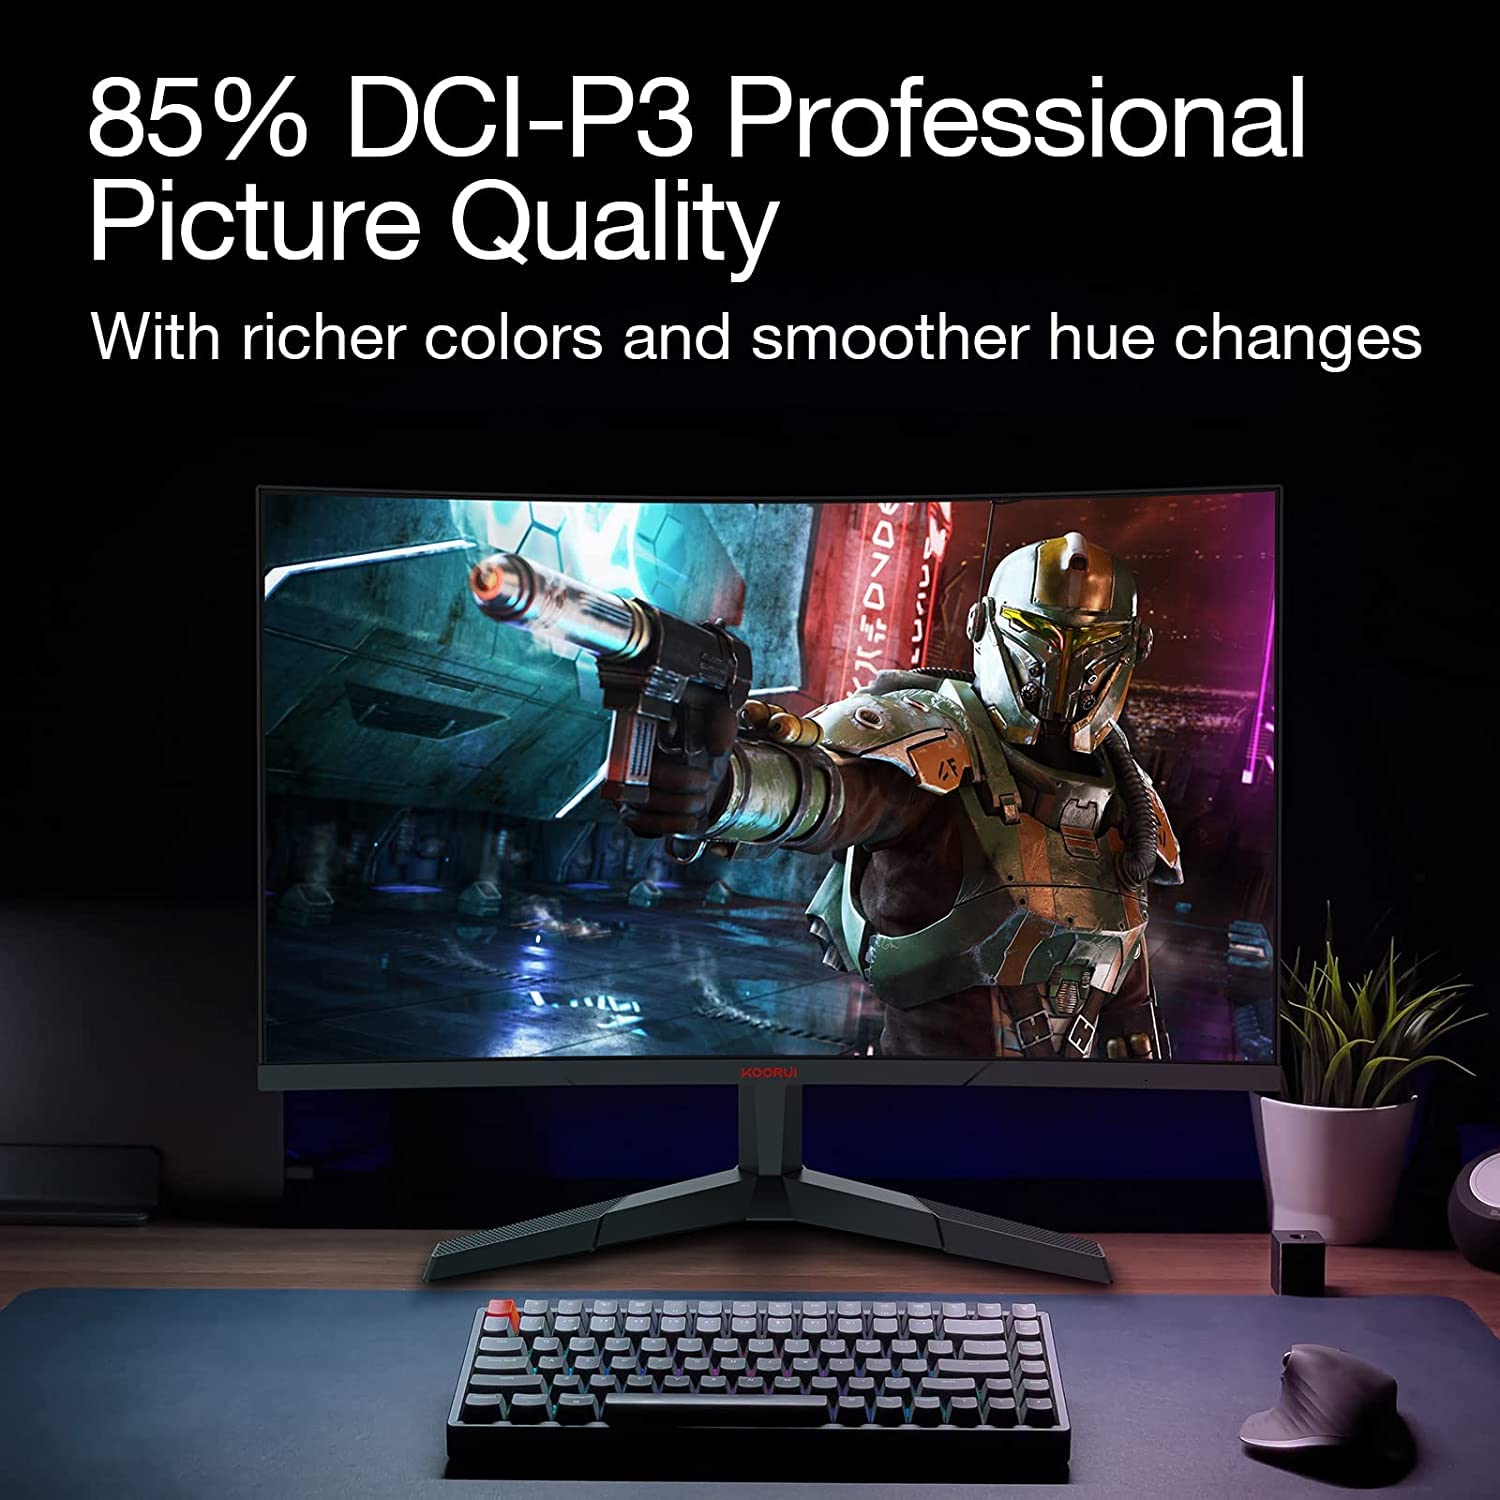 KOORUI 27 Inch Computer Monitor, QHD 2560P Gaming Monitor 144Hz(1ms, 1800R Curved VA Panel, DP1.2+HDMI*2, Build-in FreeSyc, Compatible G-sync, Narrow Bezel with Ultra-Thin), Tilt Adjustable,Eye Care